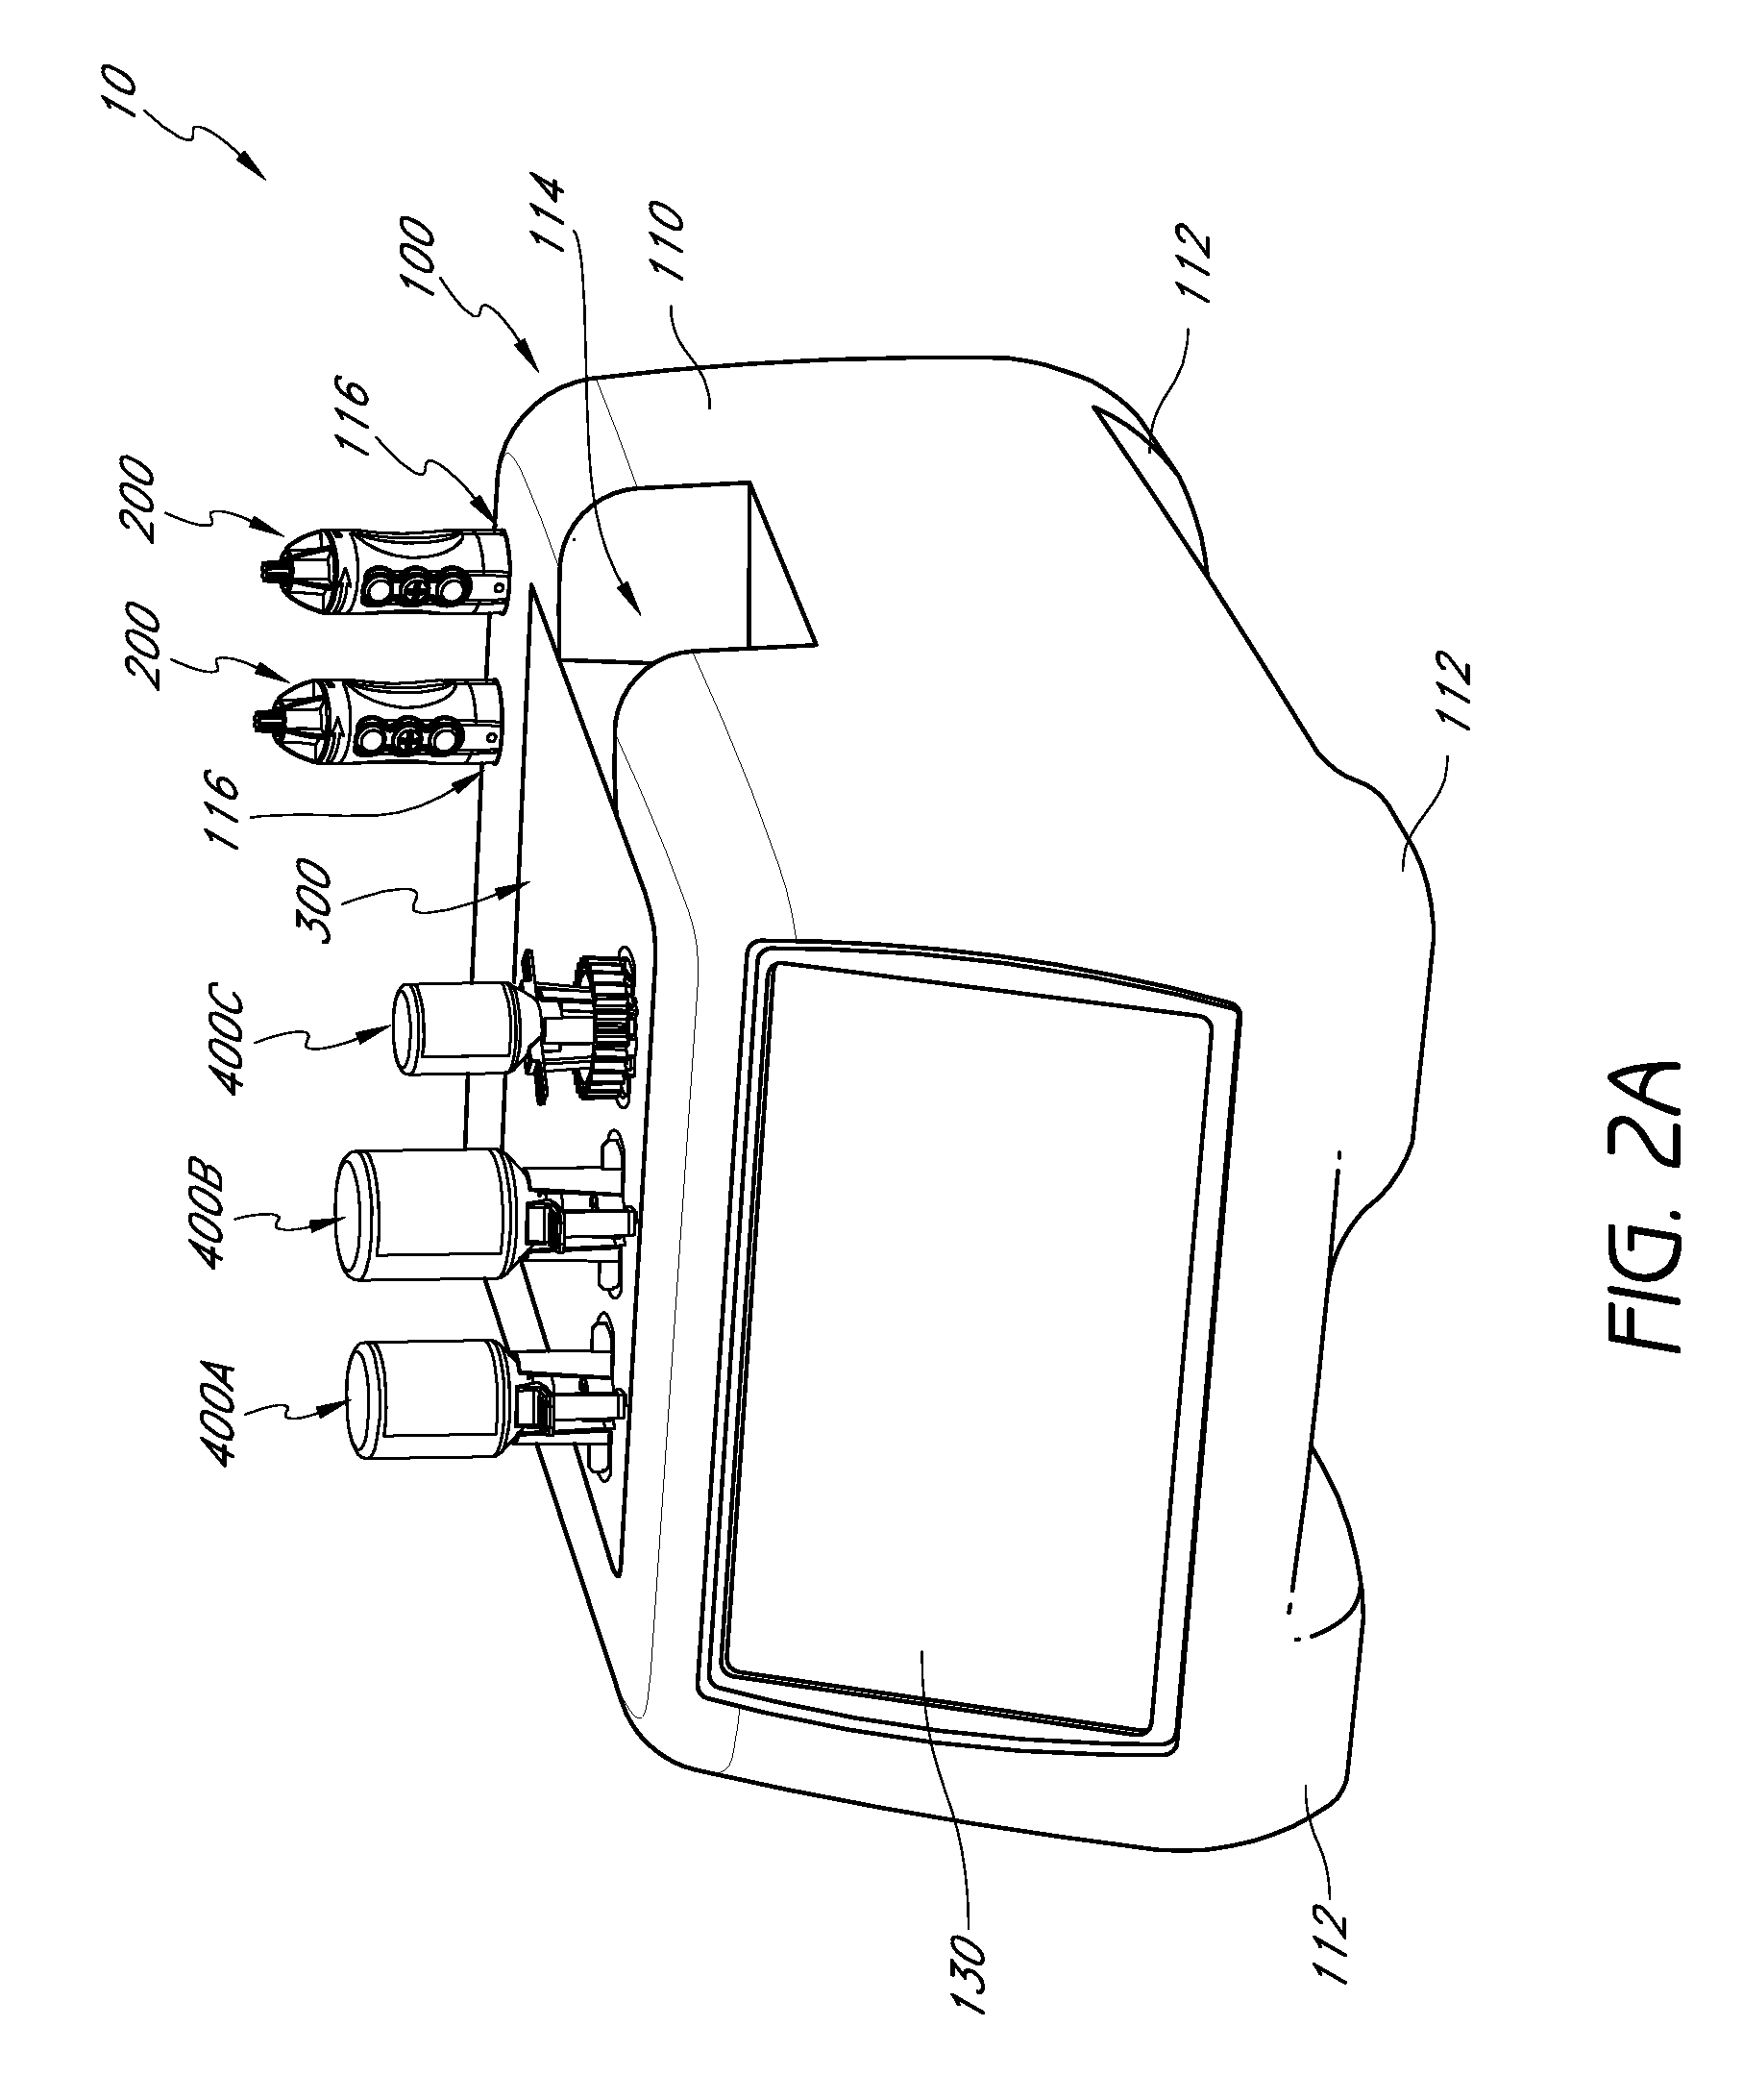 Injection systems for delivery of fluids to joints